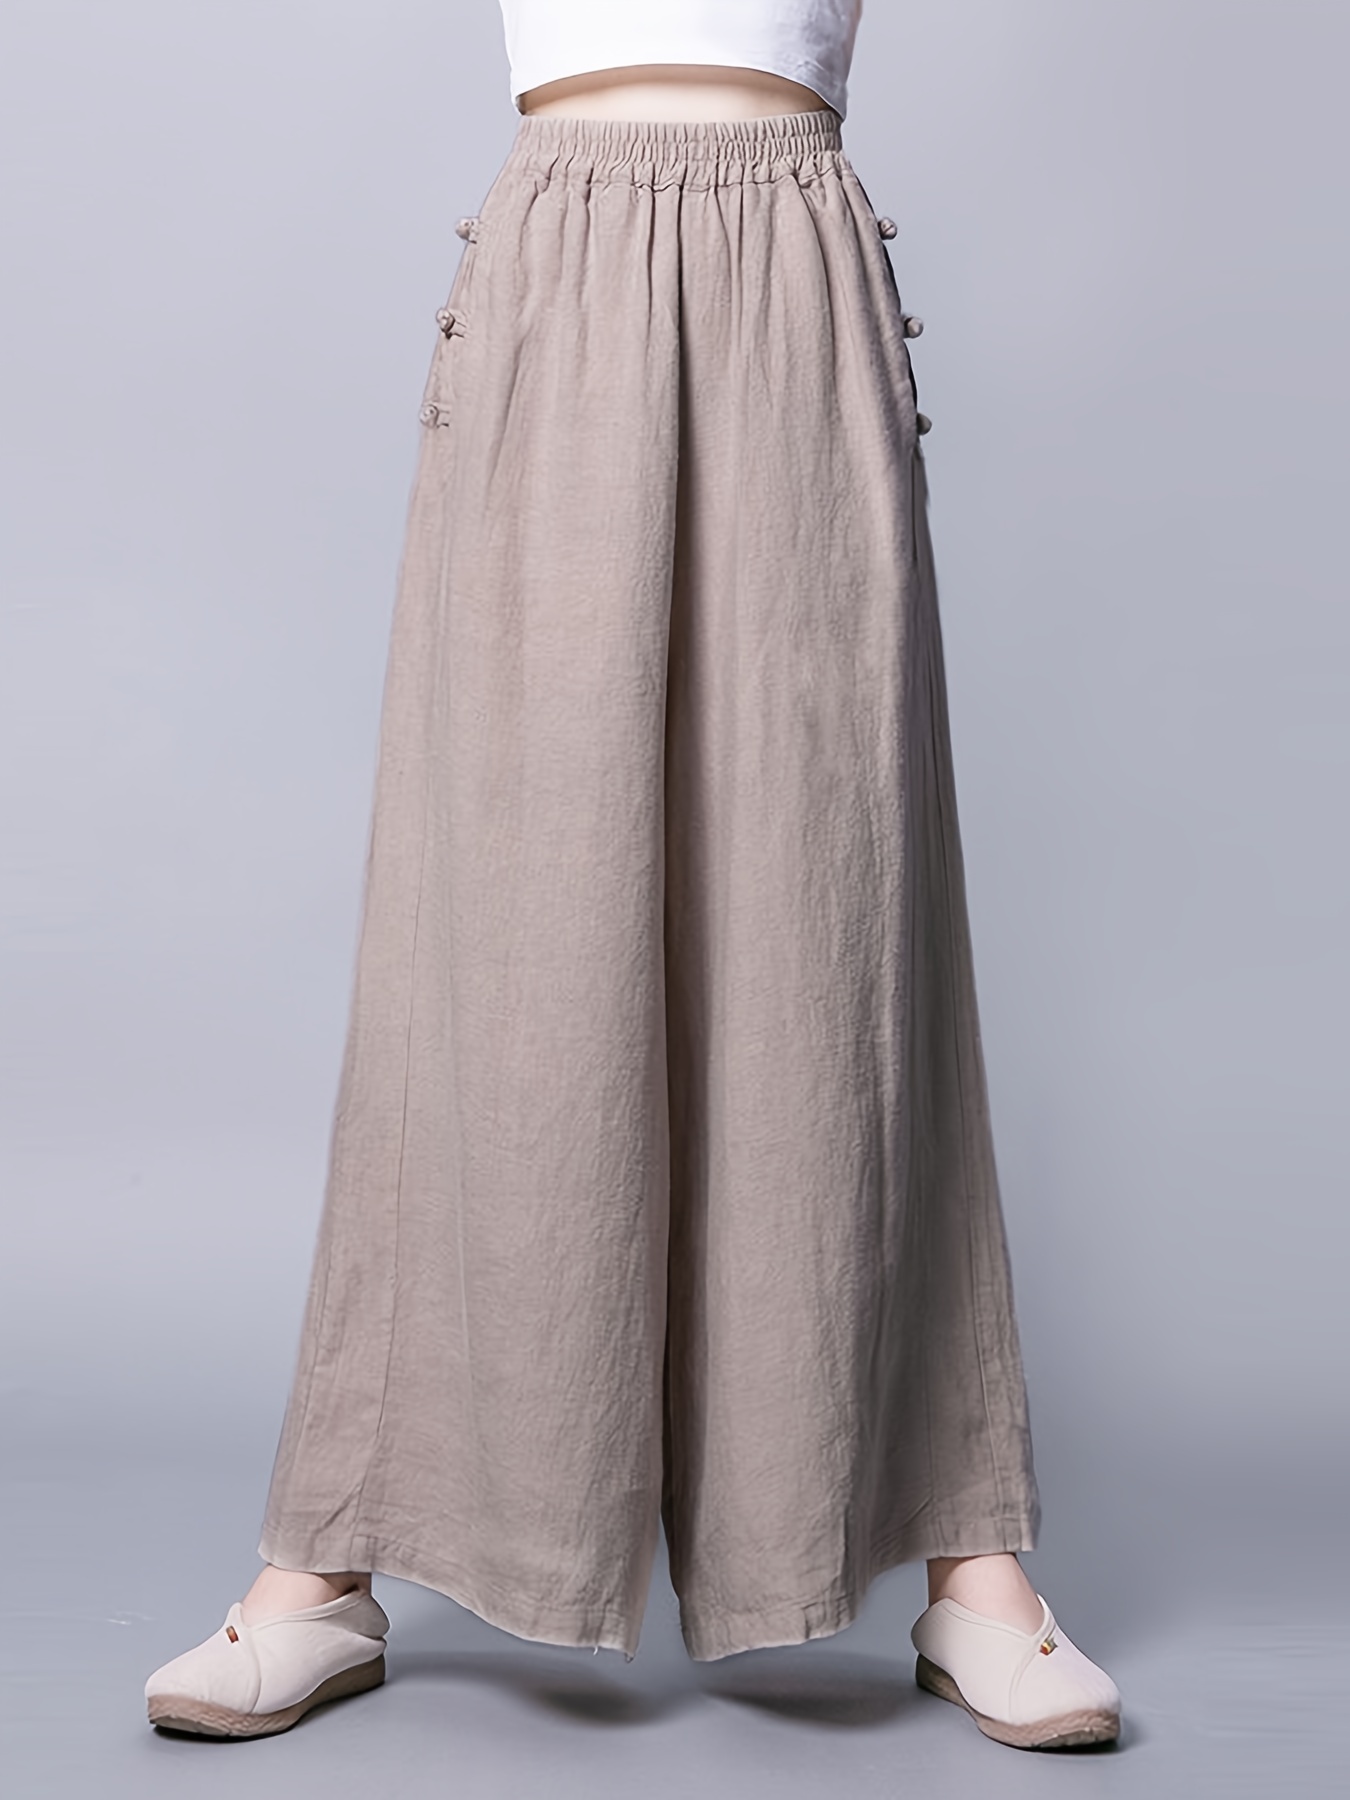 New Summer Chinese style Women's Embroidery Stretch Pants Cotton linen  Trousers